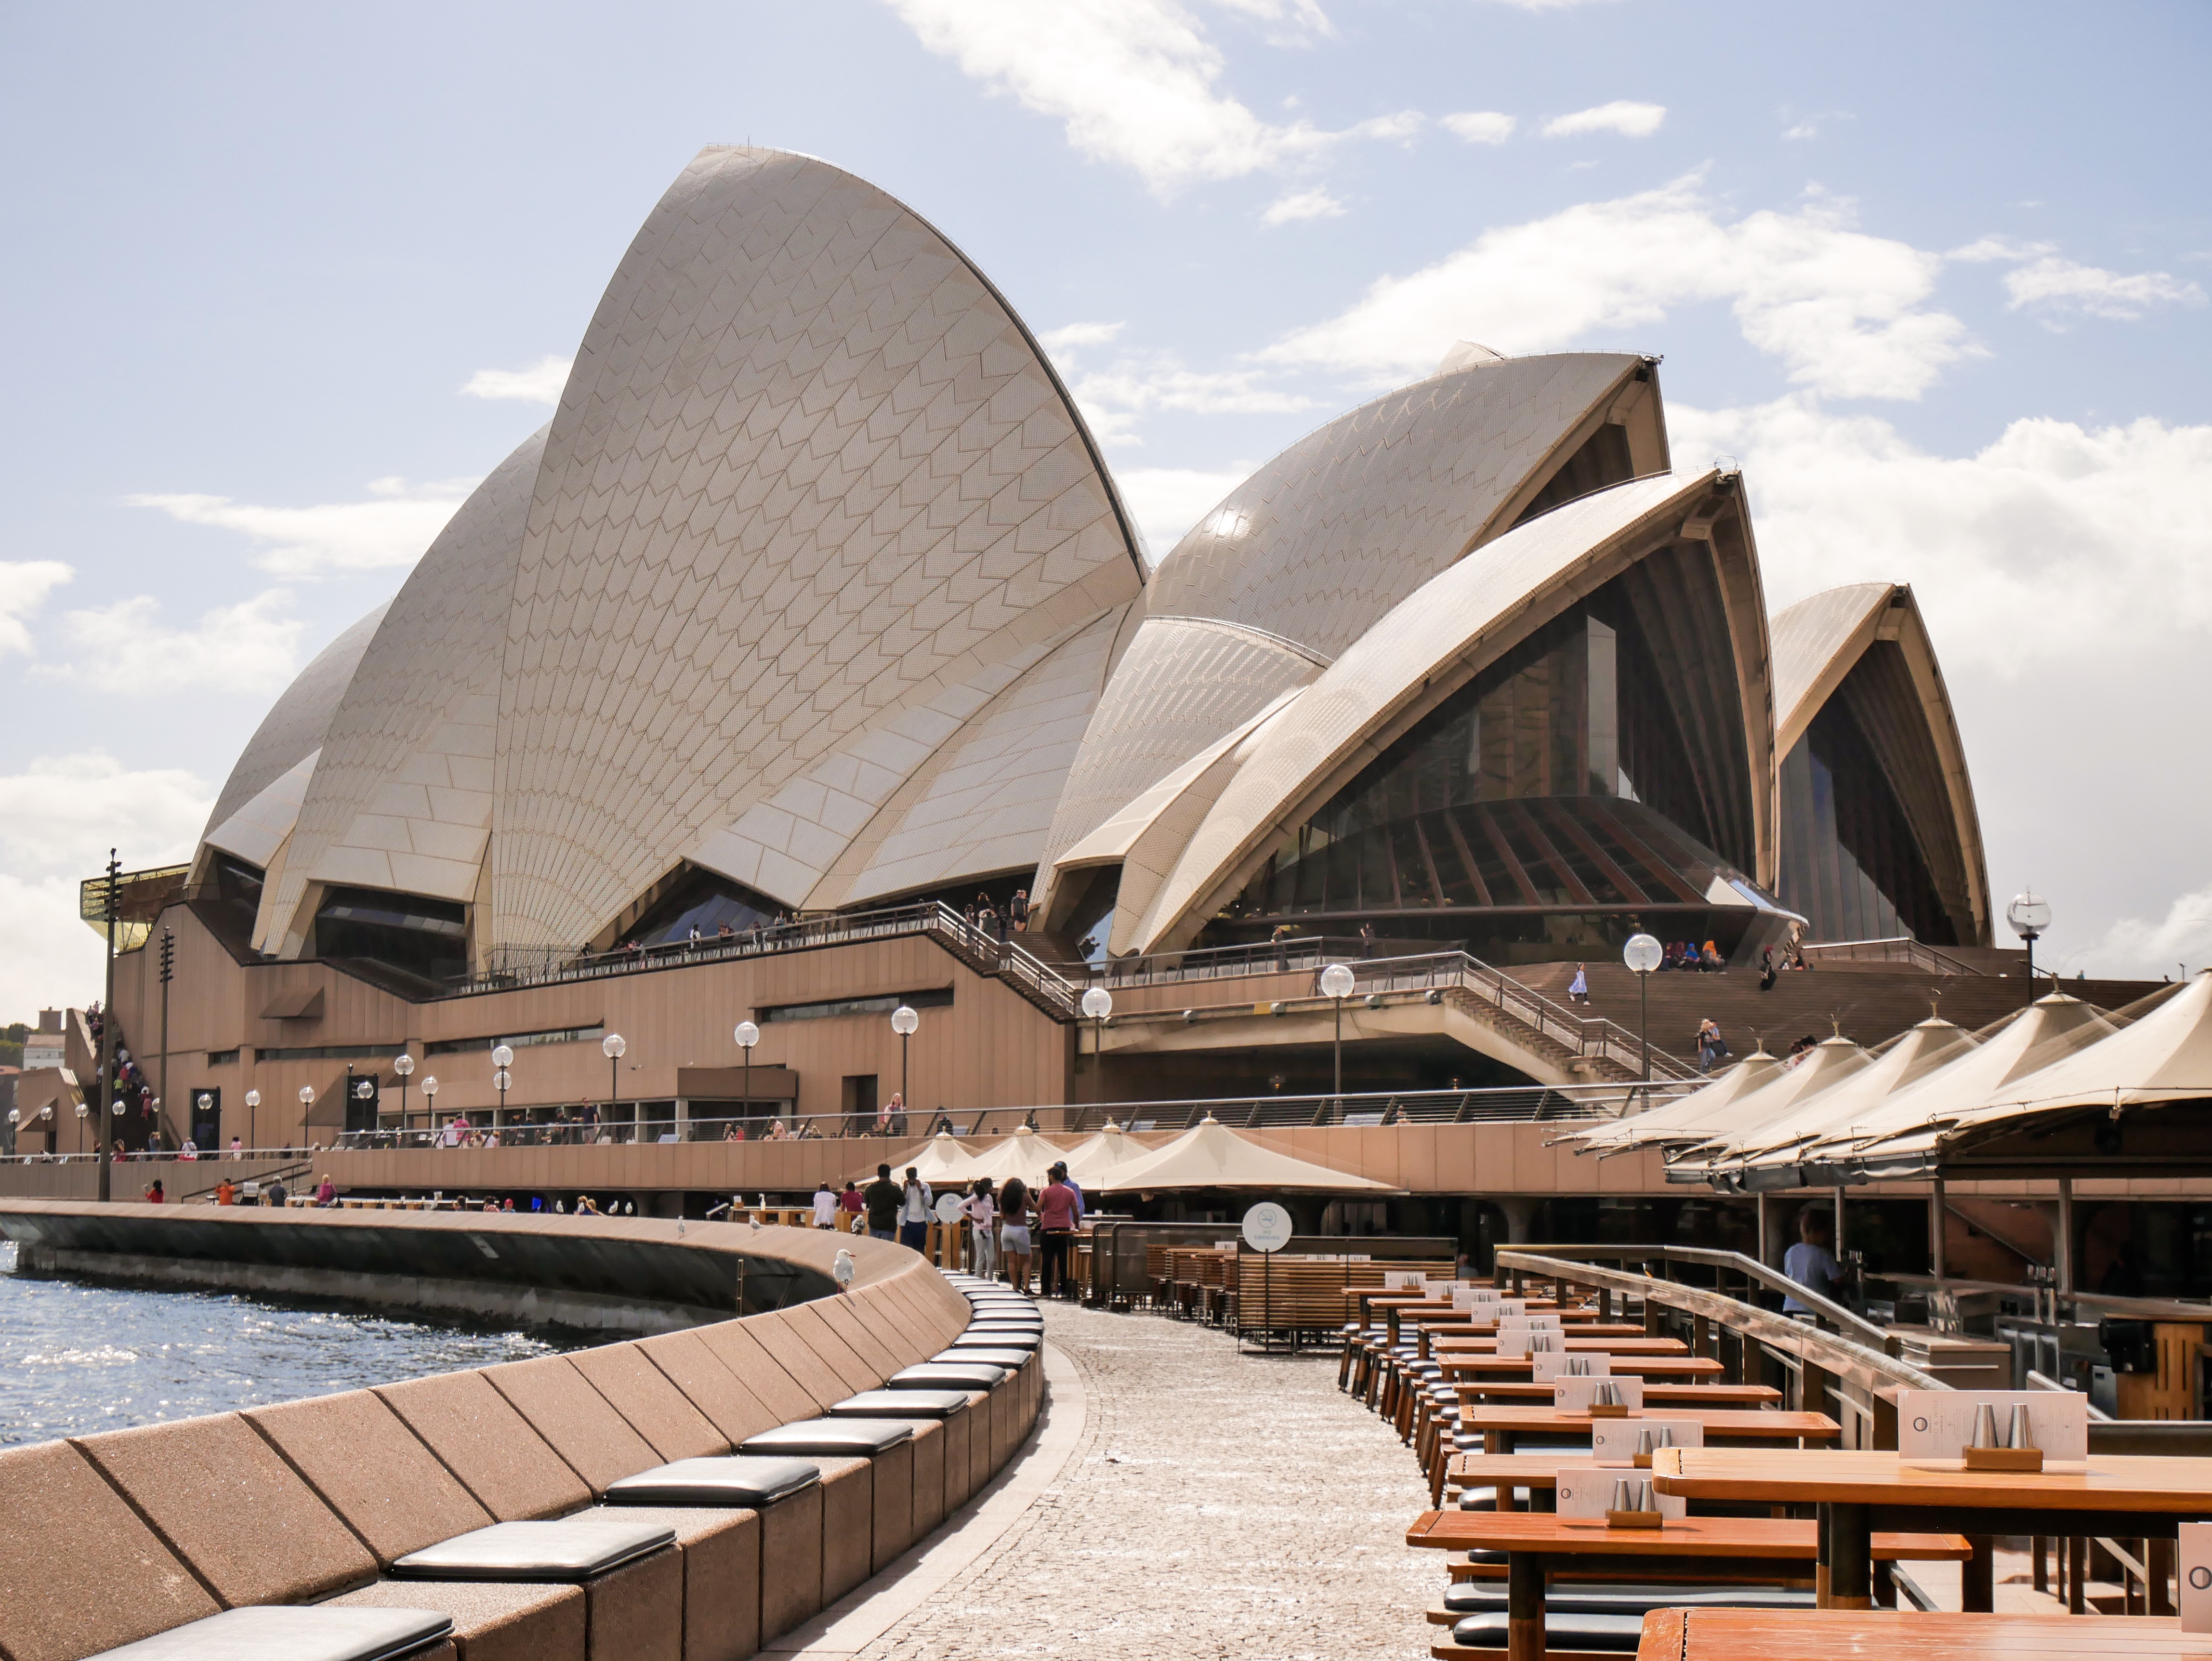 What to do in Sydney, Australia in 48 hours